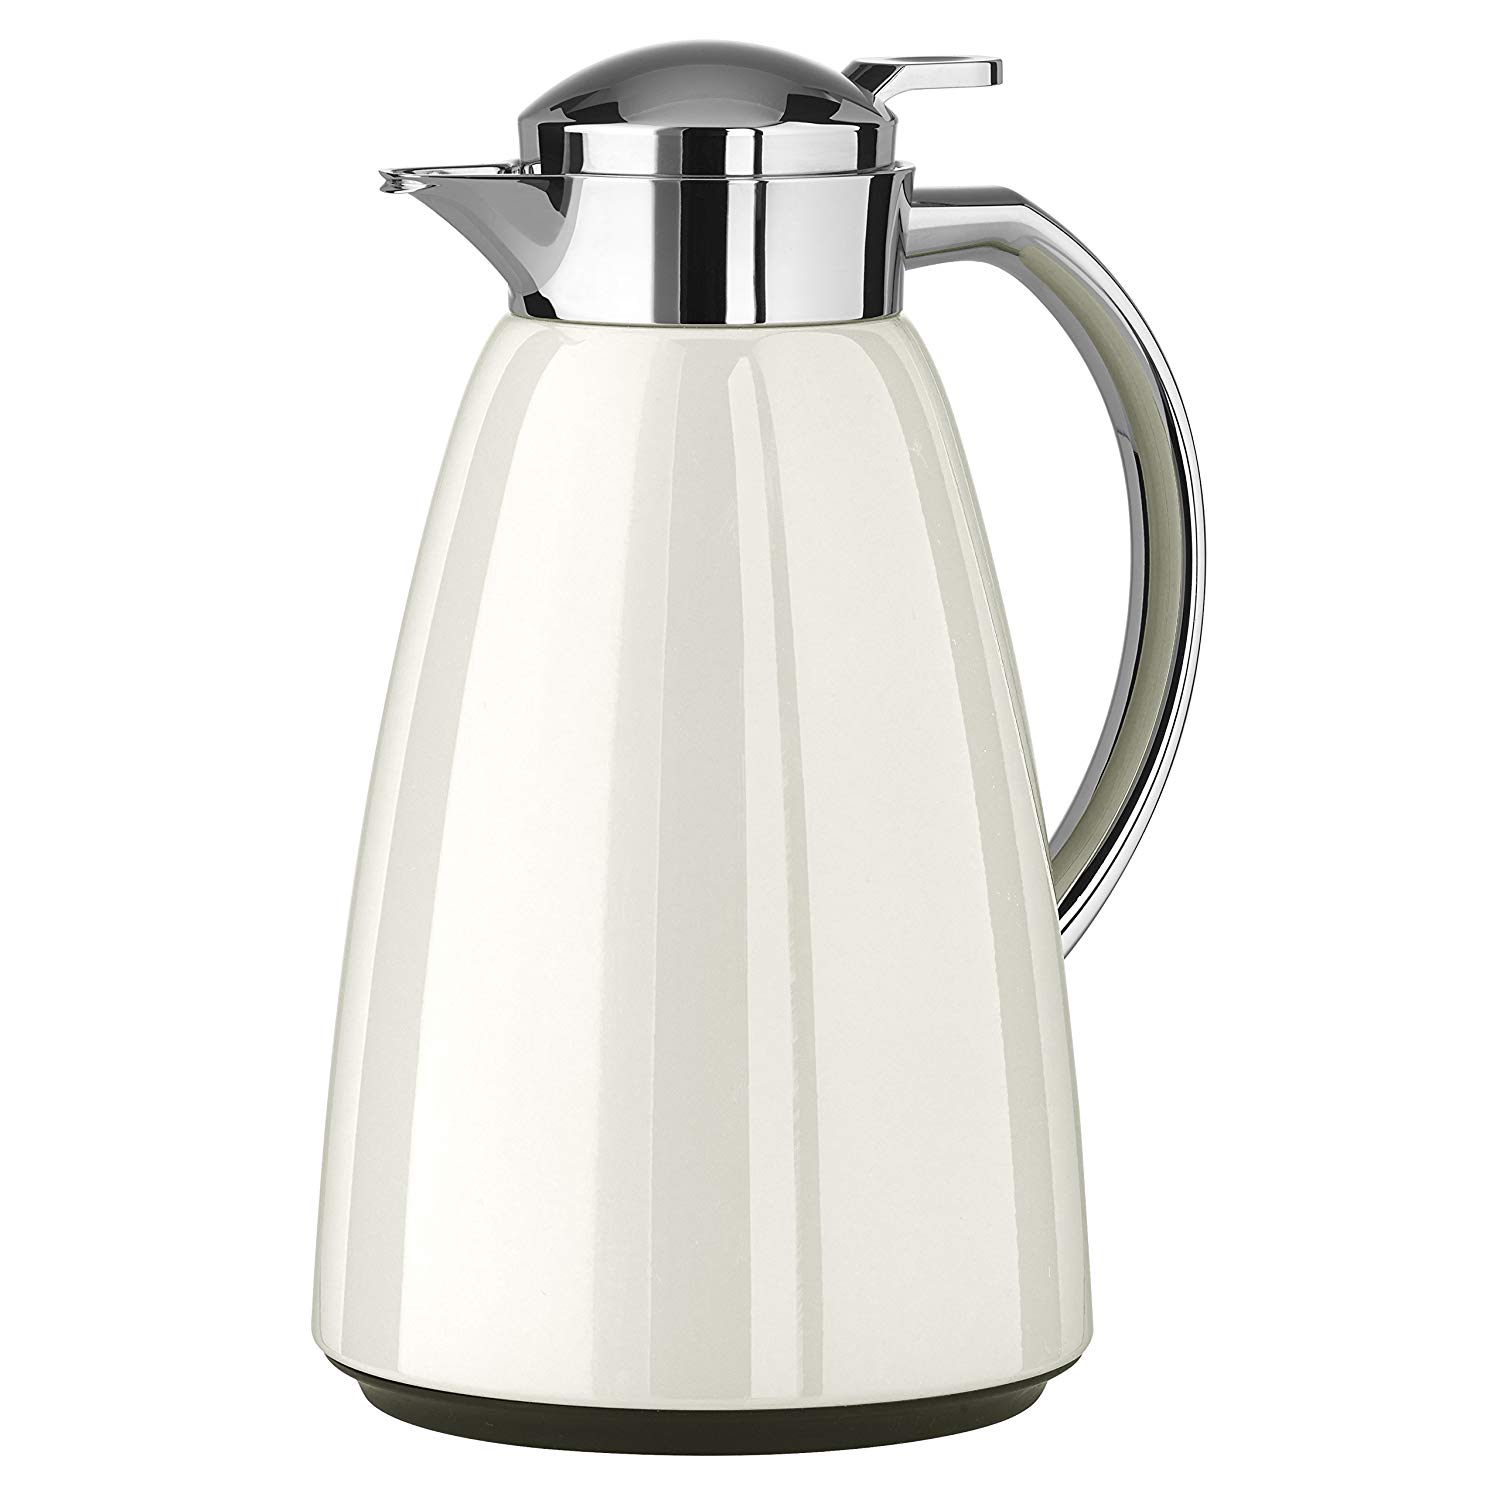 Tefal Campo Jug Stainless Steel – White, 15 X 15 X 25.5 Cm